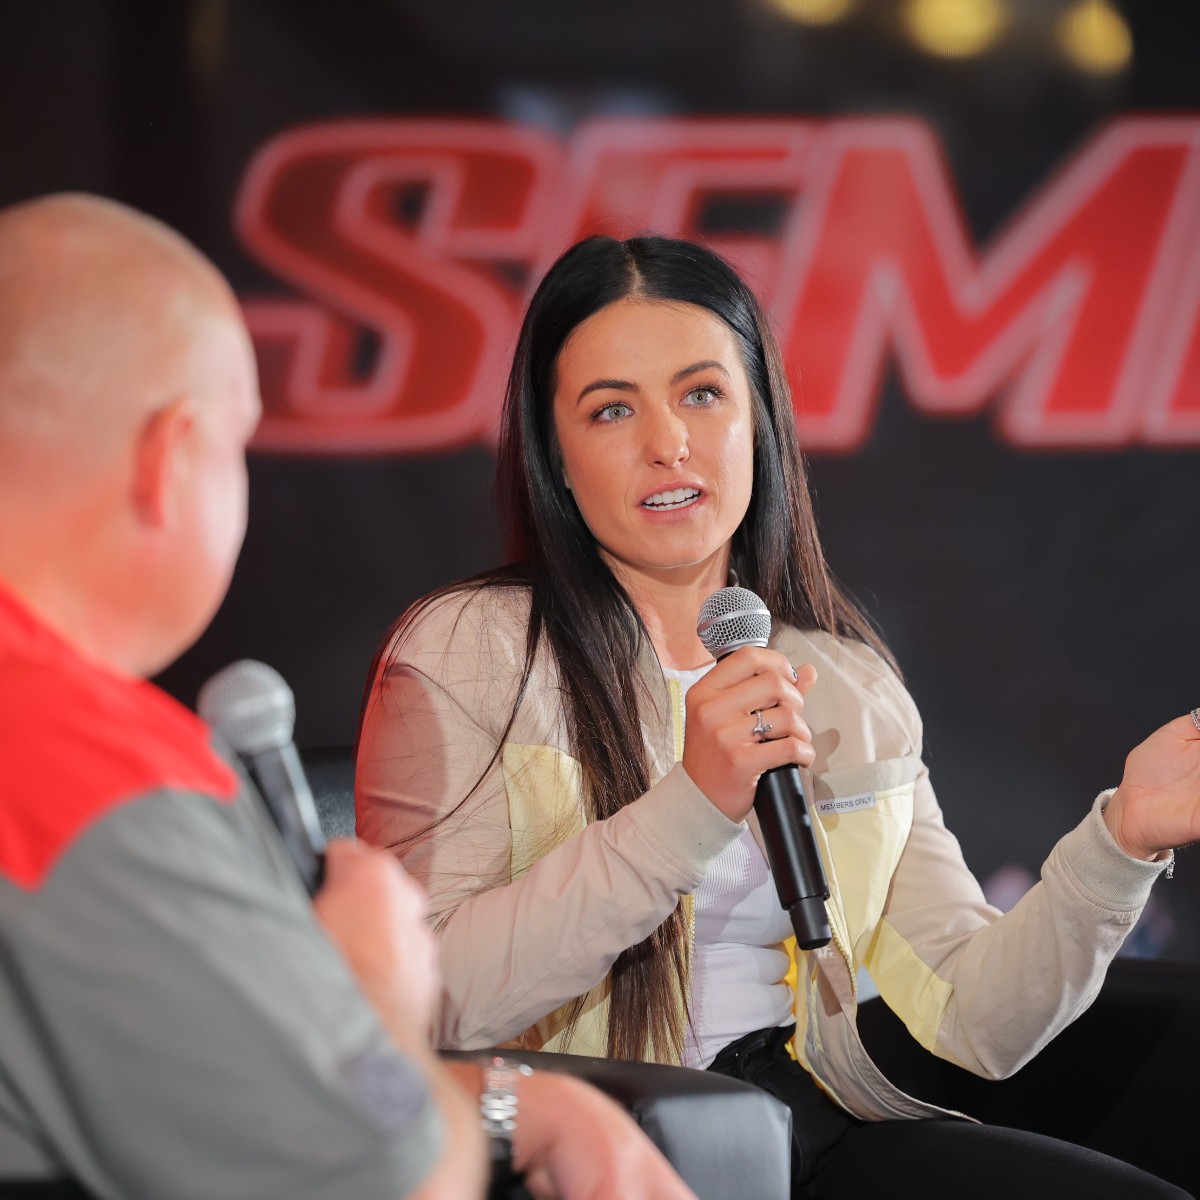 SEMA Central is where you can see stars from across the industry gather at the SEMA Show! Hear stories, and learn more about the latest trends, technology, and more from every corner of the aftermarket. 🔗 See more in '24 at semashow.com!